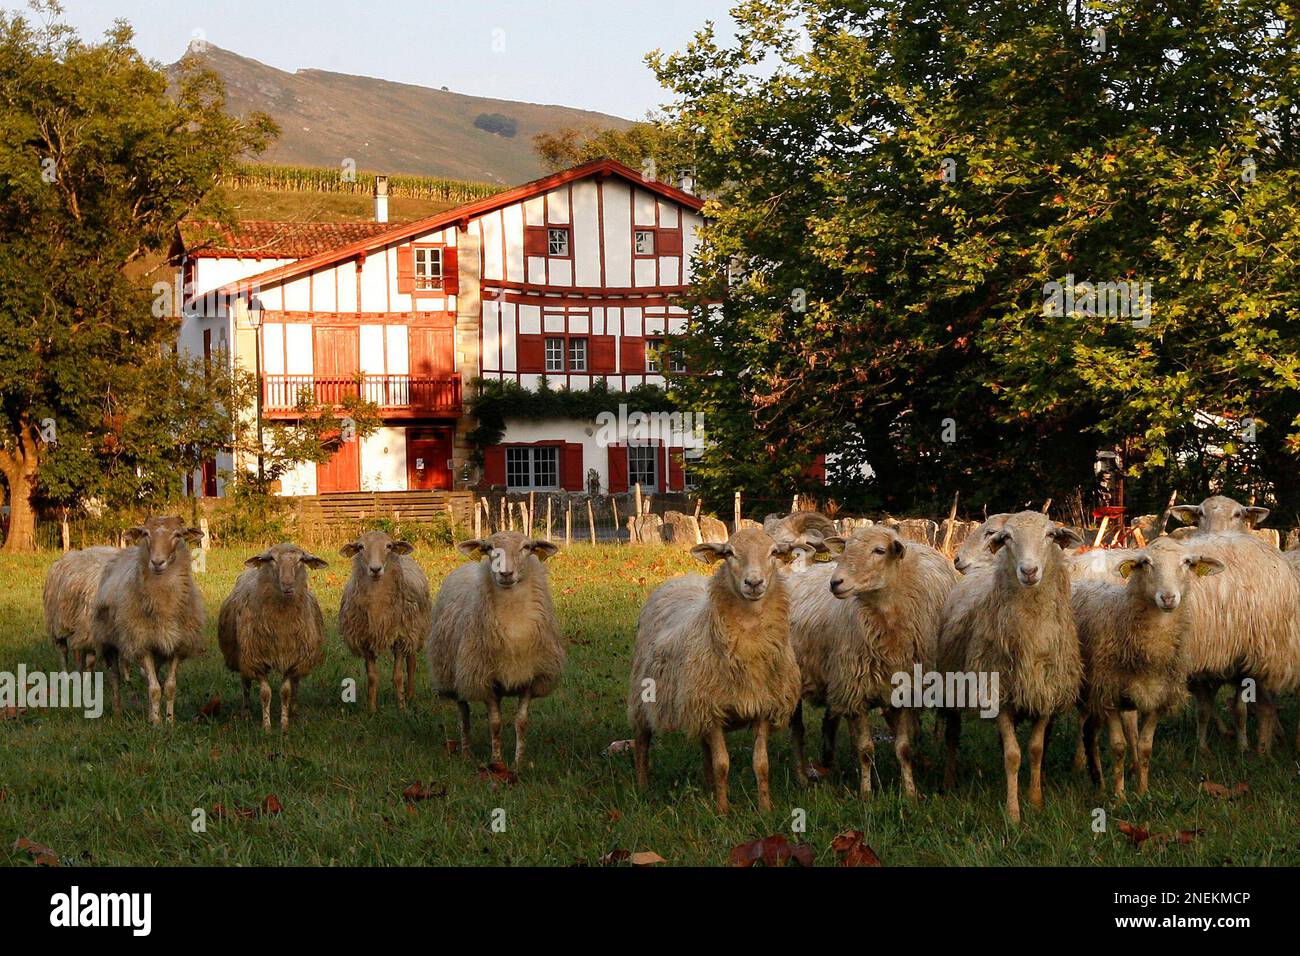 Sheep in front of typical Basque farm in Sare, near Saint Jean de Luz,  southwestern France, Tuesday Sept. 15, 2009. France's Basque region in the  south-western corner of the country, near the